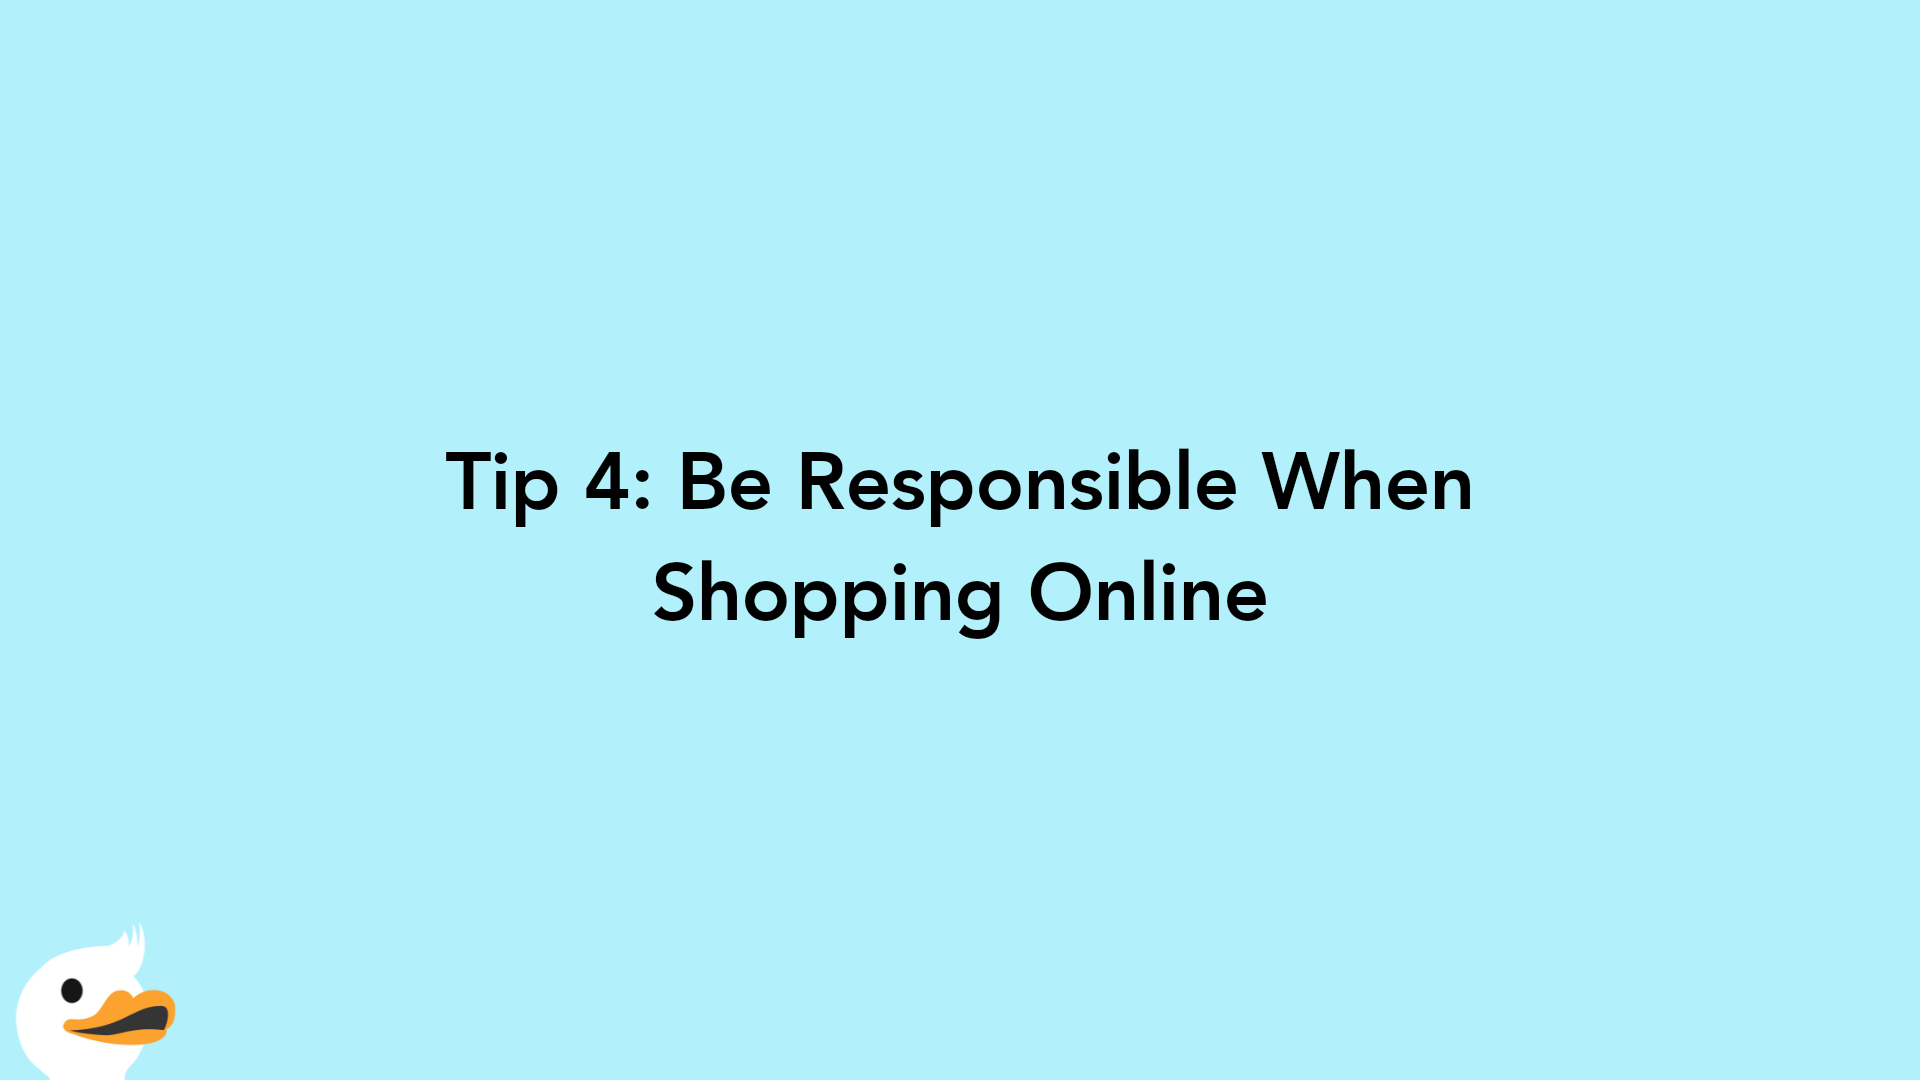 Tip 4: Be Responsible When Shopping Online